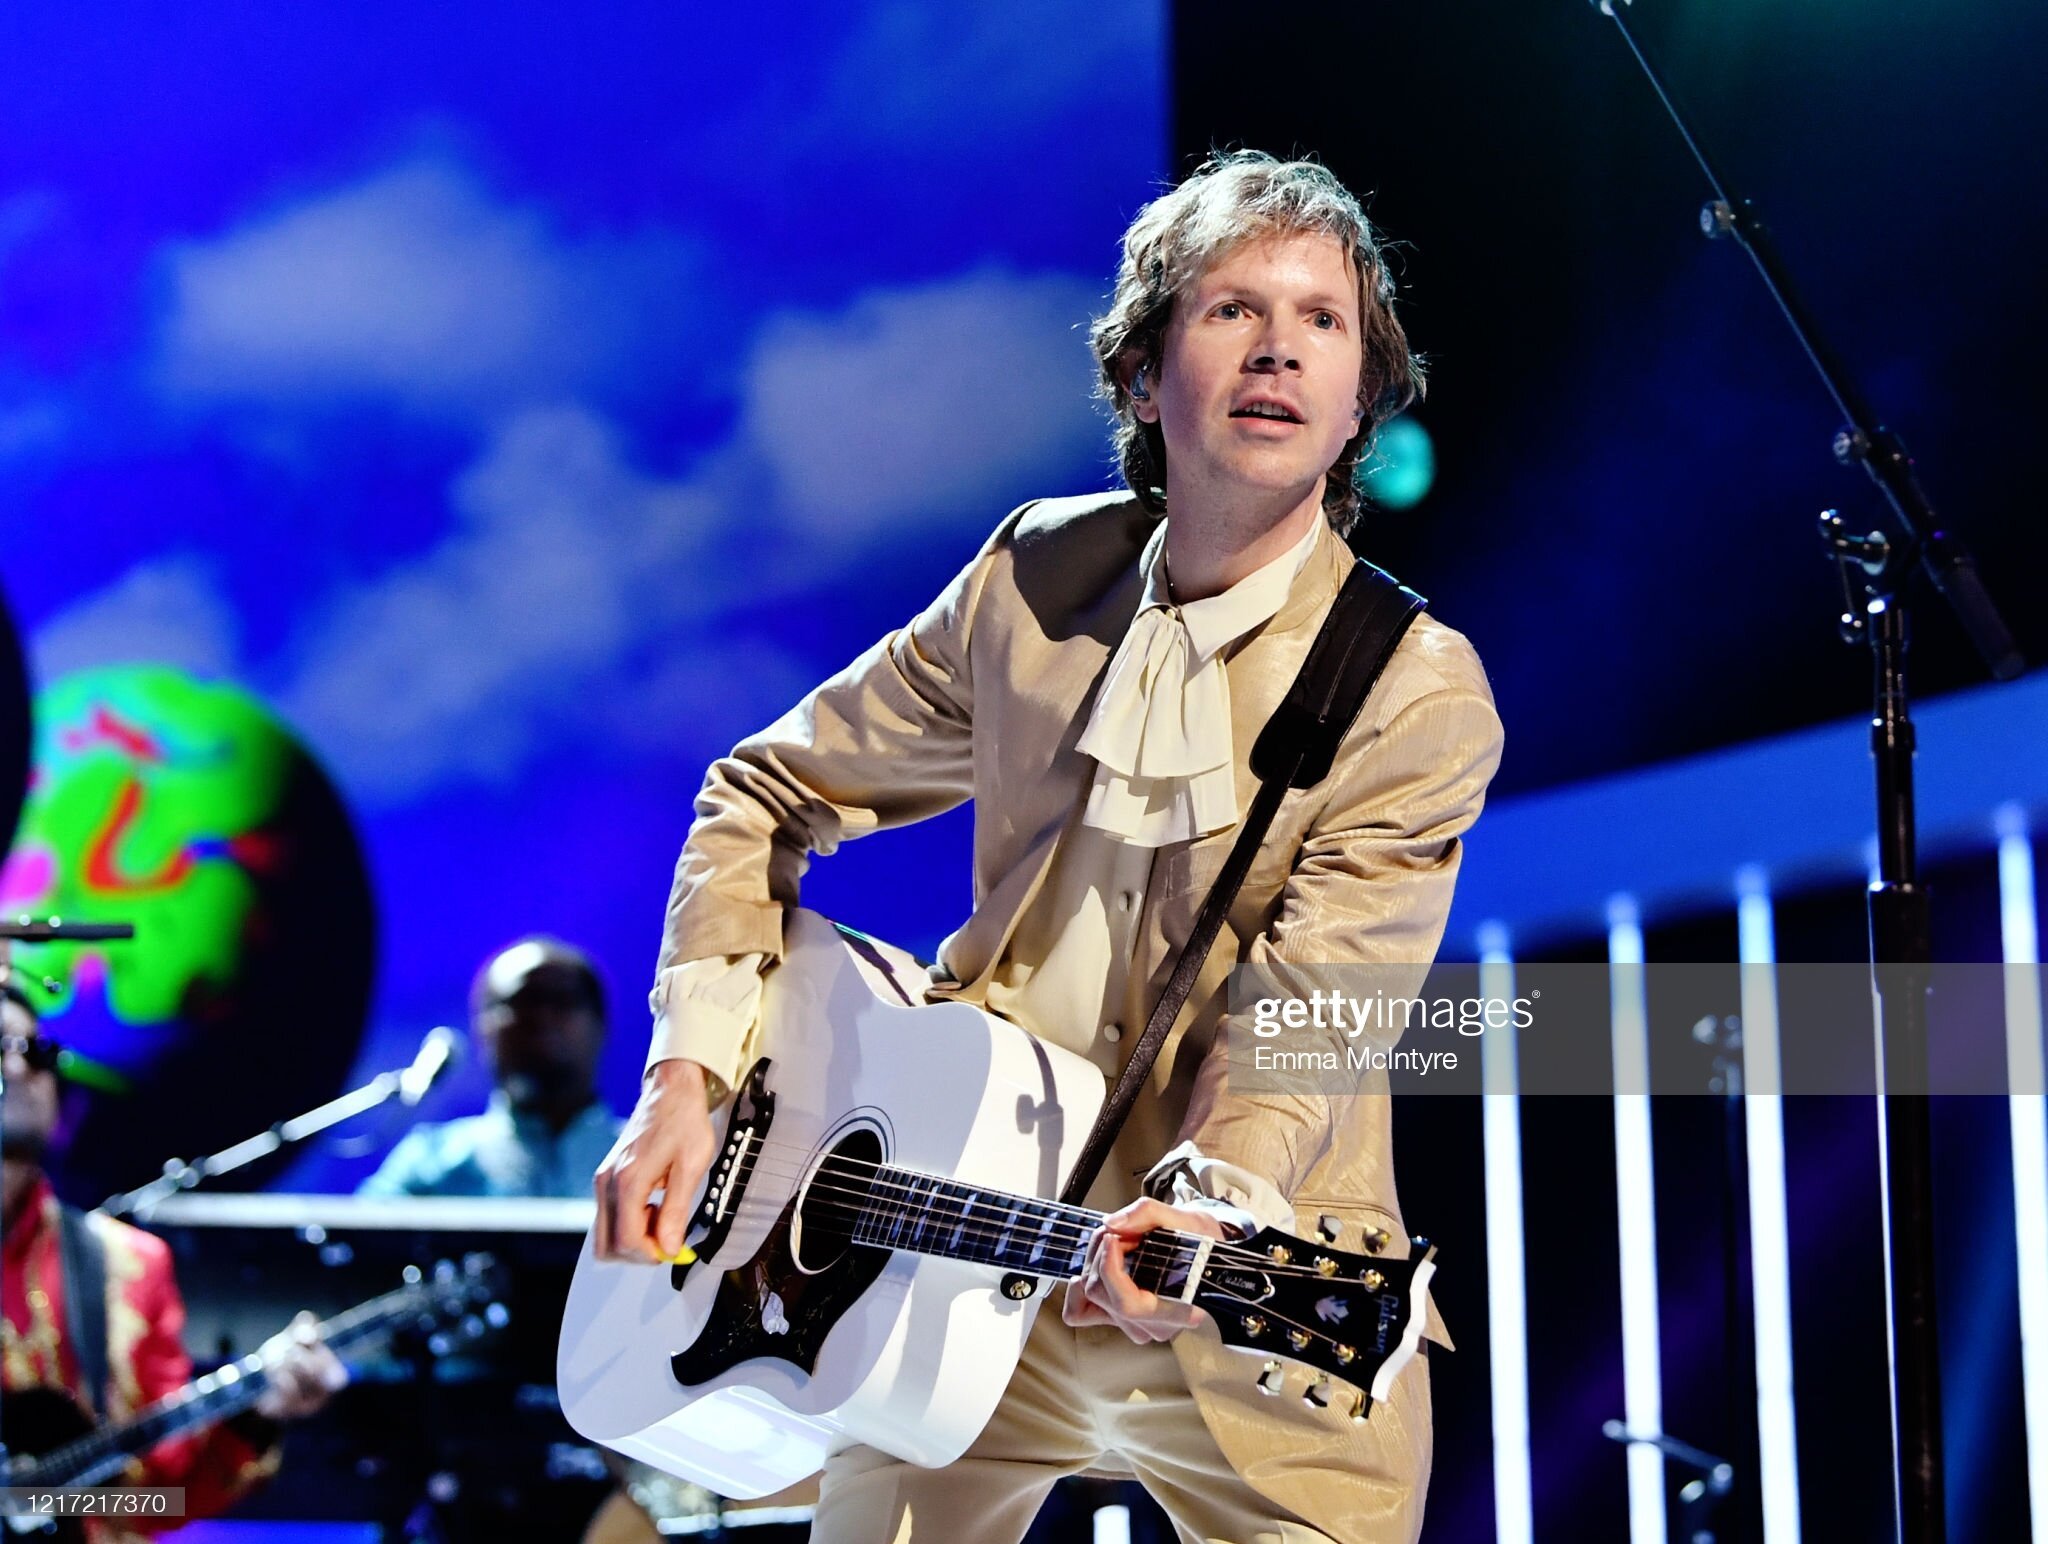 gettyimages-1217217370-2048x2048.jpg